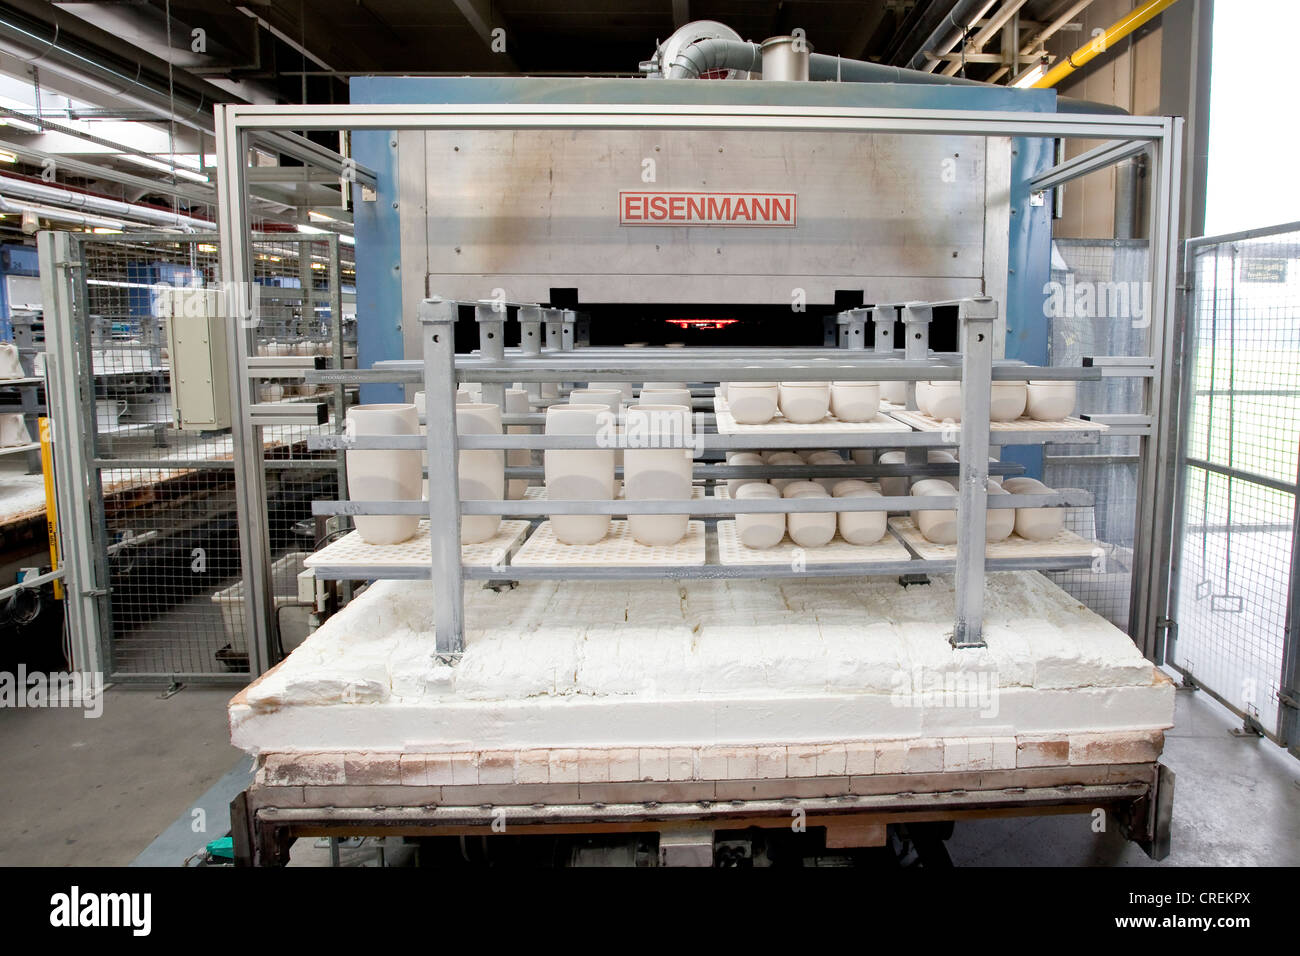 Kiln from the Eisenmann company in the production of tableware at the porcelain manufacturer Rosenthal GmbH, Speichersdorf Stock Photo